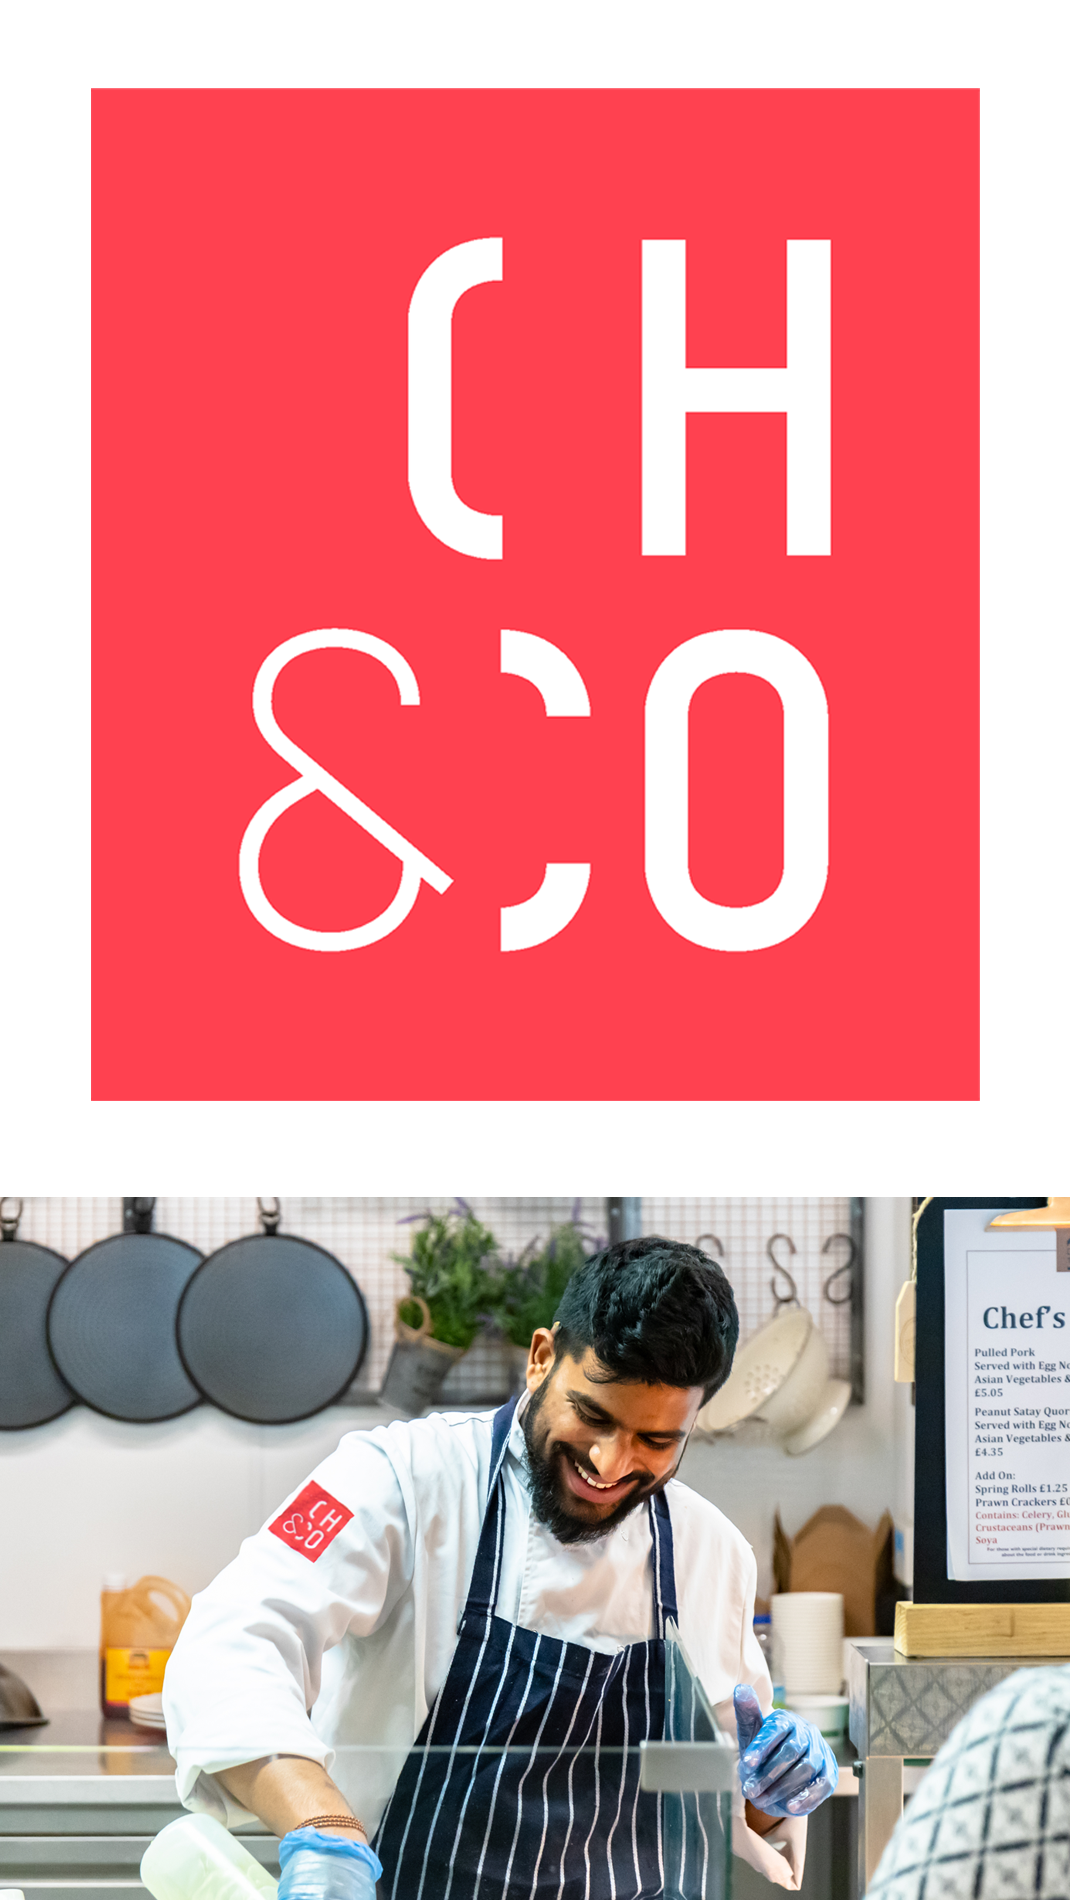 CH&CO image and logo